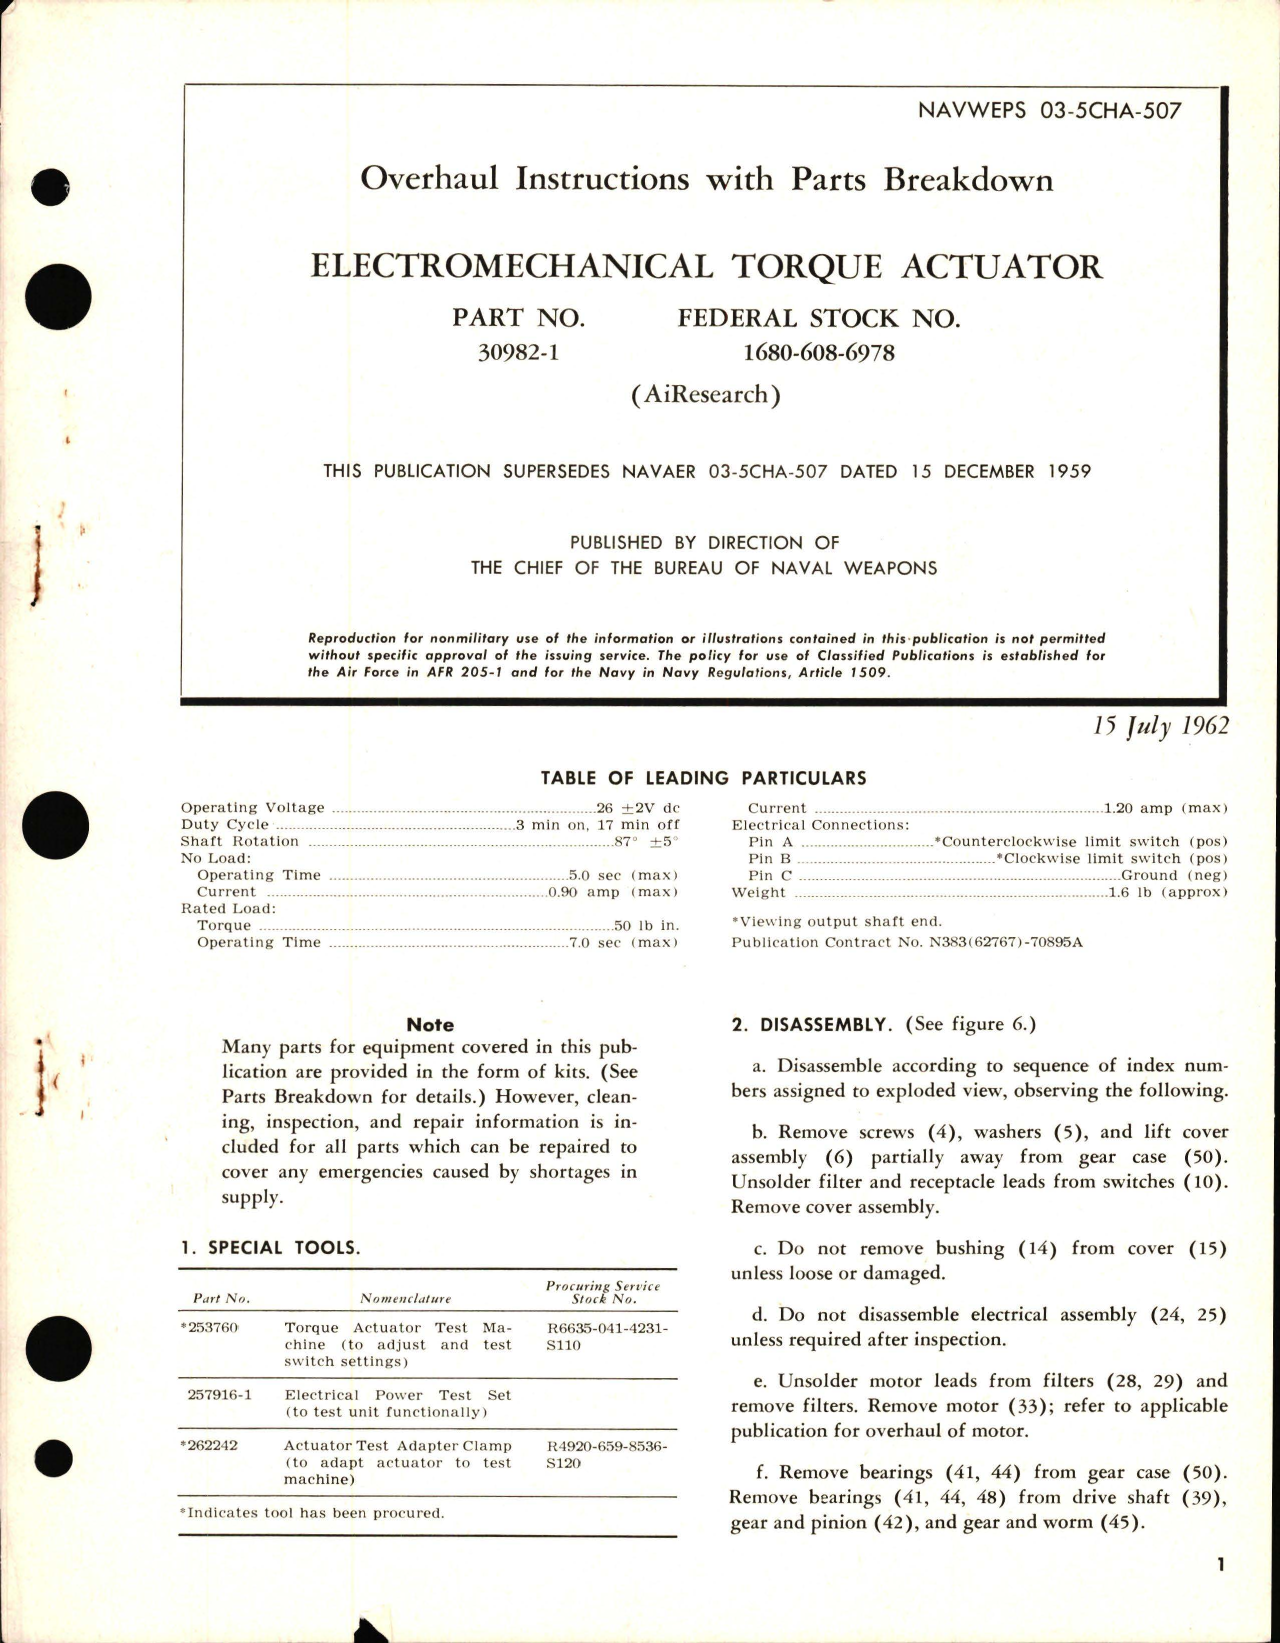 Sample page 1 from AirCorps Library document: Overhaul Instructions with Parts Breakdown for Electromechanical Torque Actuator - Part 30982-1